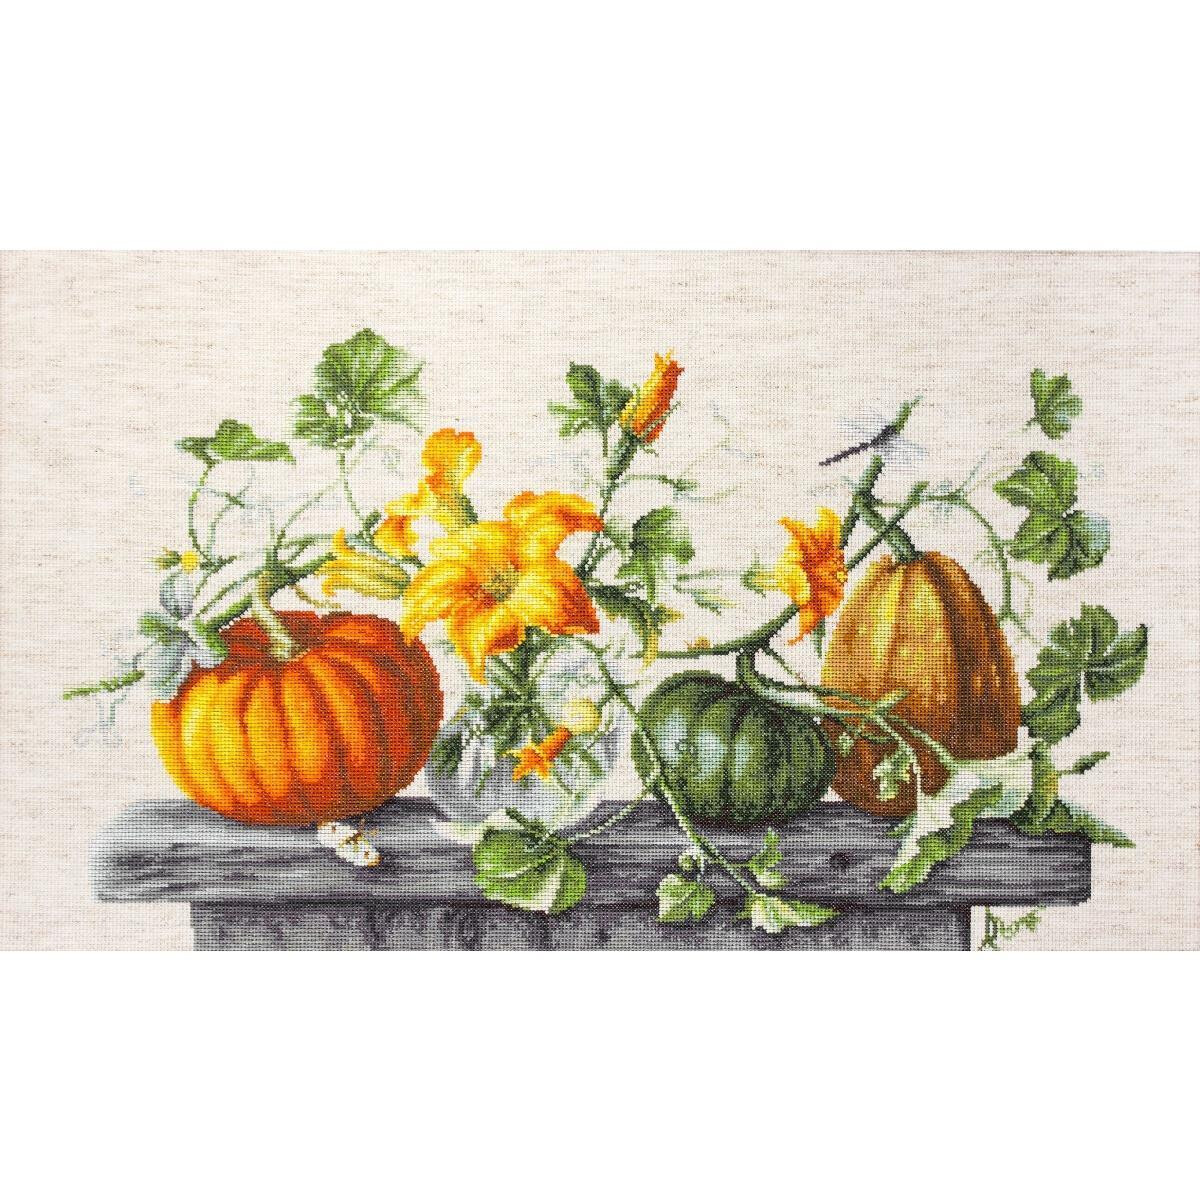 A detailed Luca-s embroidery pack with pumpkins and...